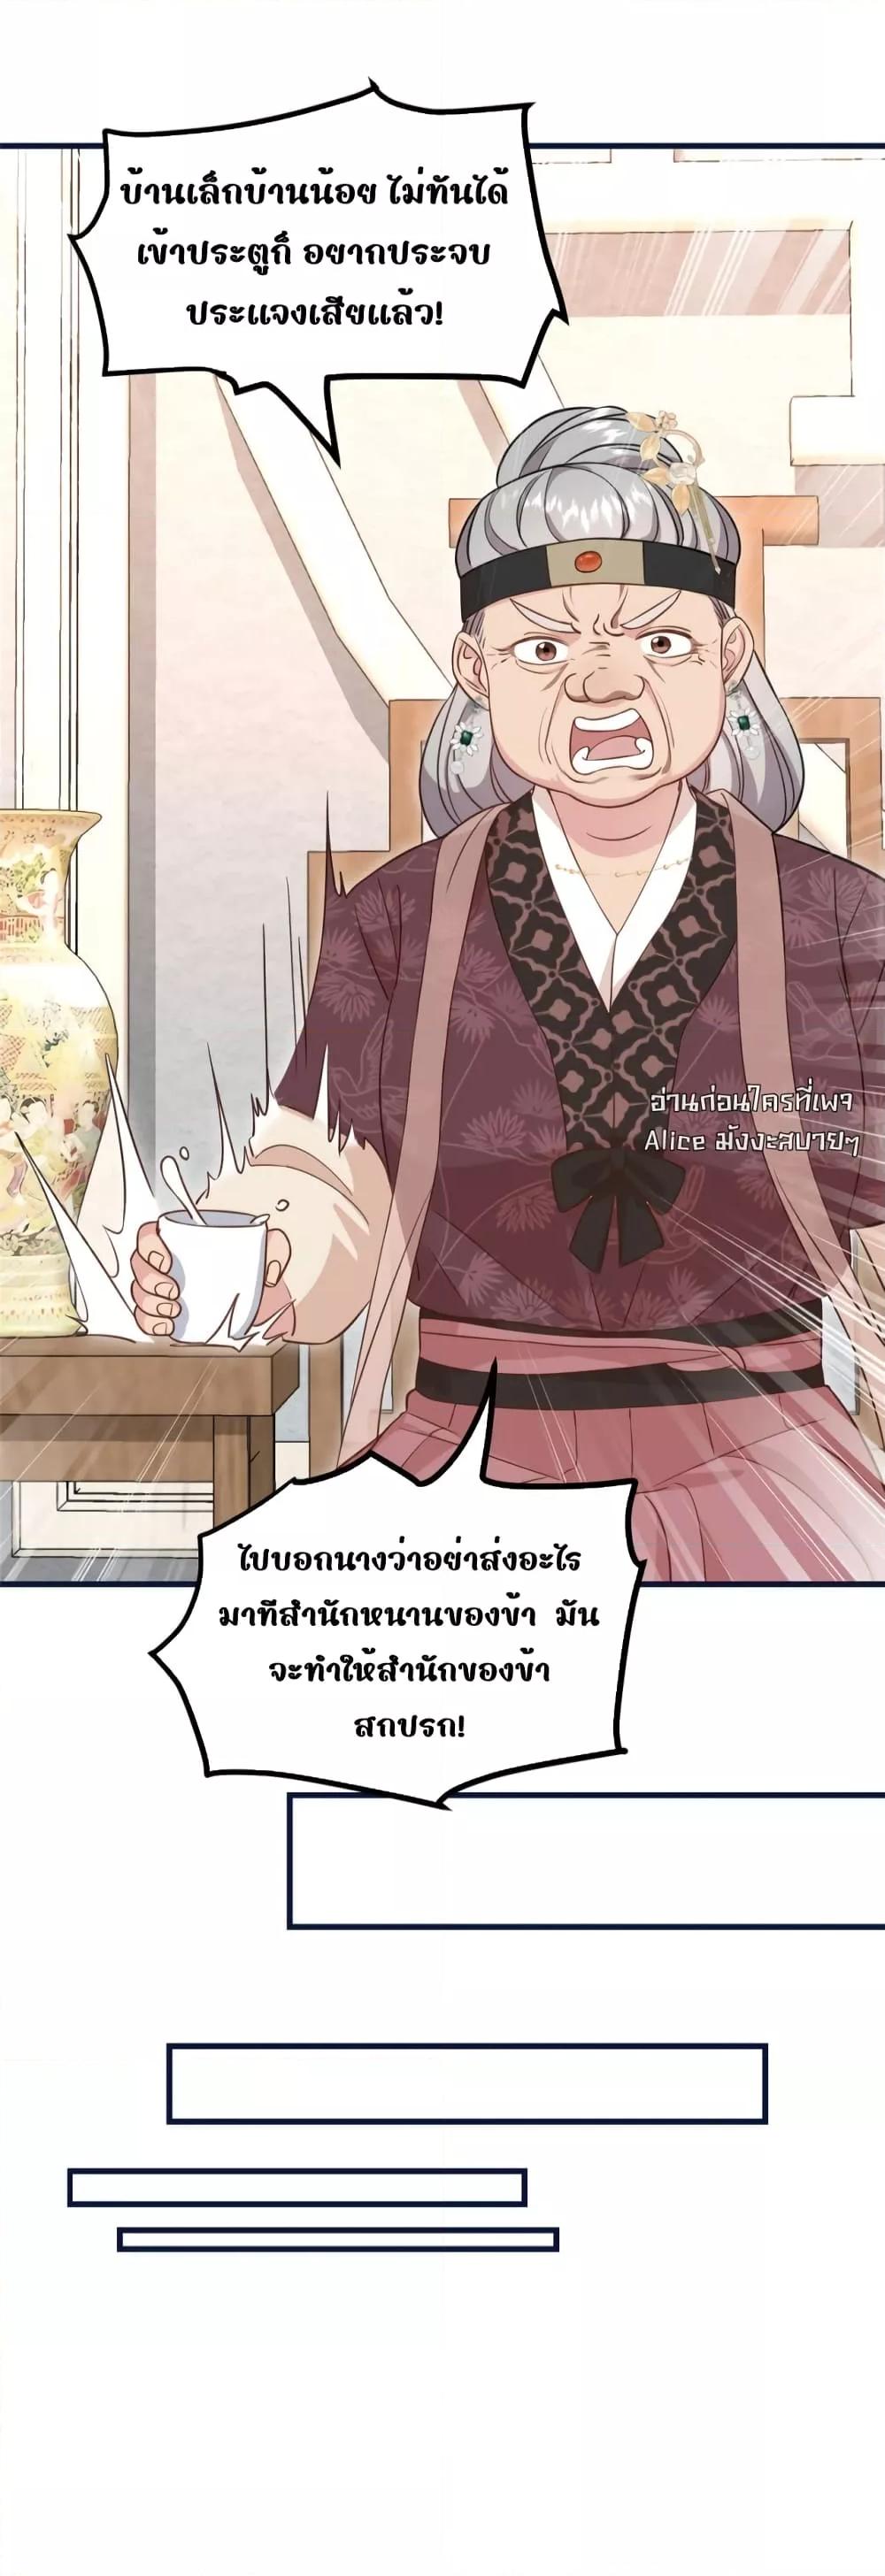 After I Was Reborn, I Became the Petite in the ตอนที่ 4 (51)